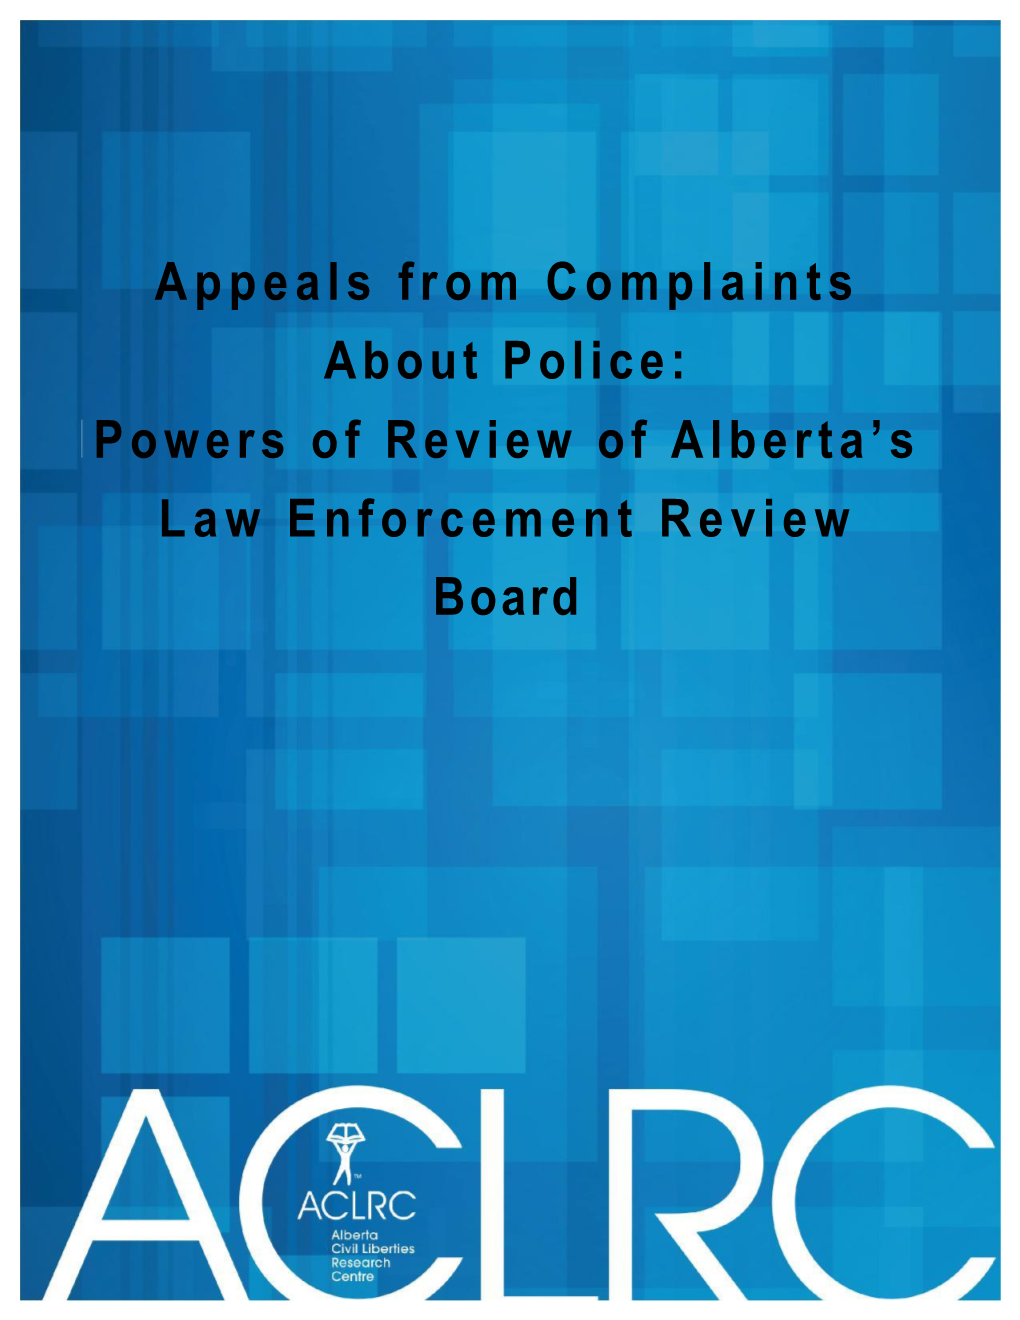 Appeals from Complaints About Police: Powers of Review of Alberta's Law Enforcement Review Board